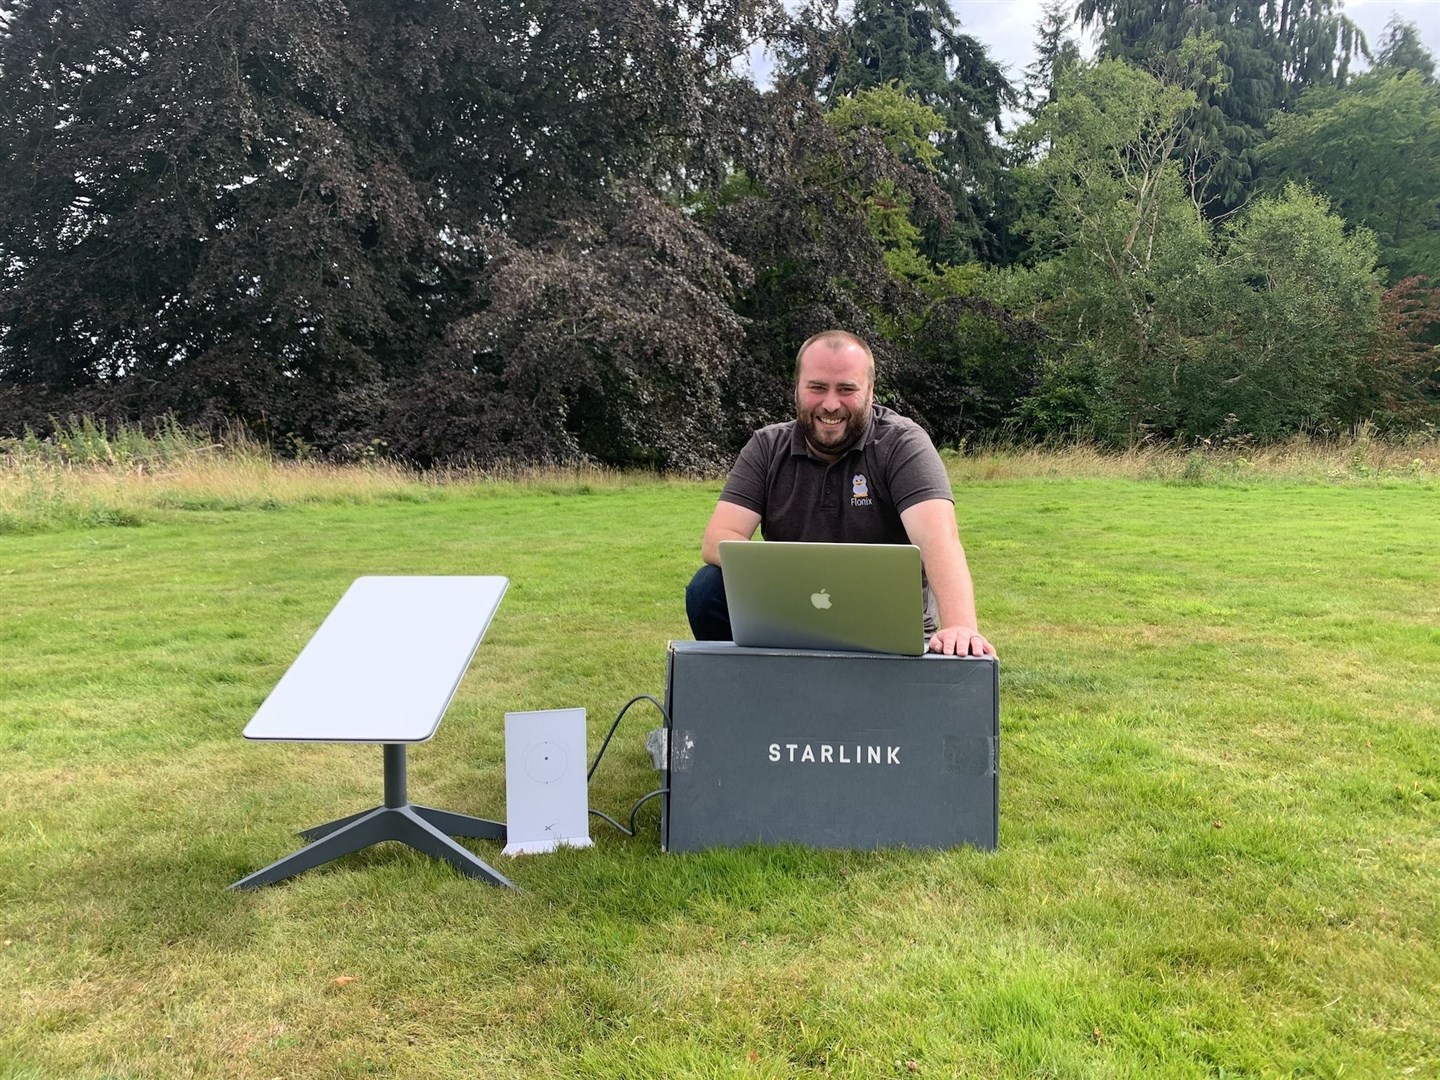 Flonix MD Daniel Lamb with one of the Starlink installation systems.